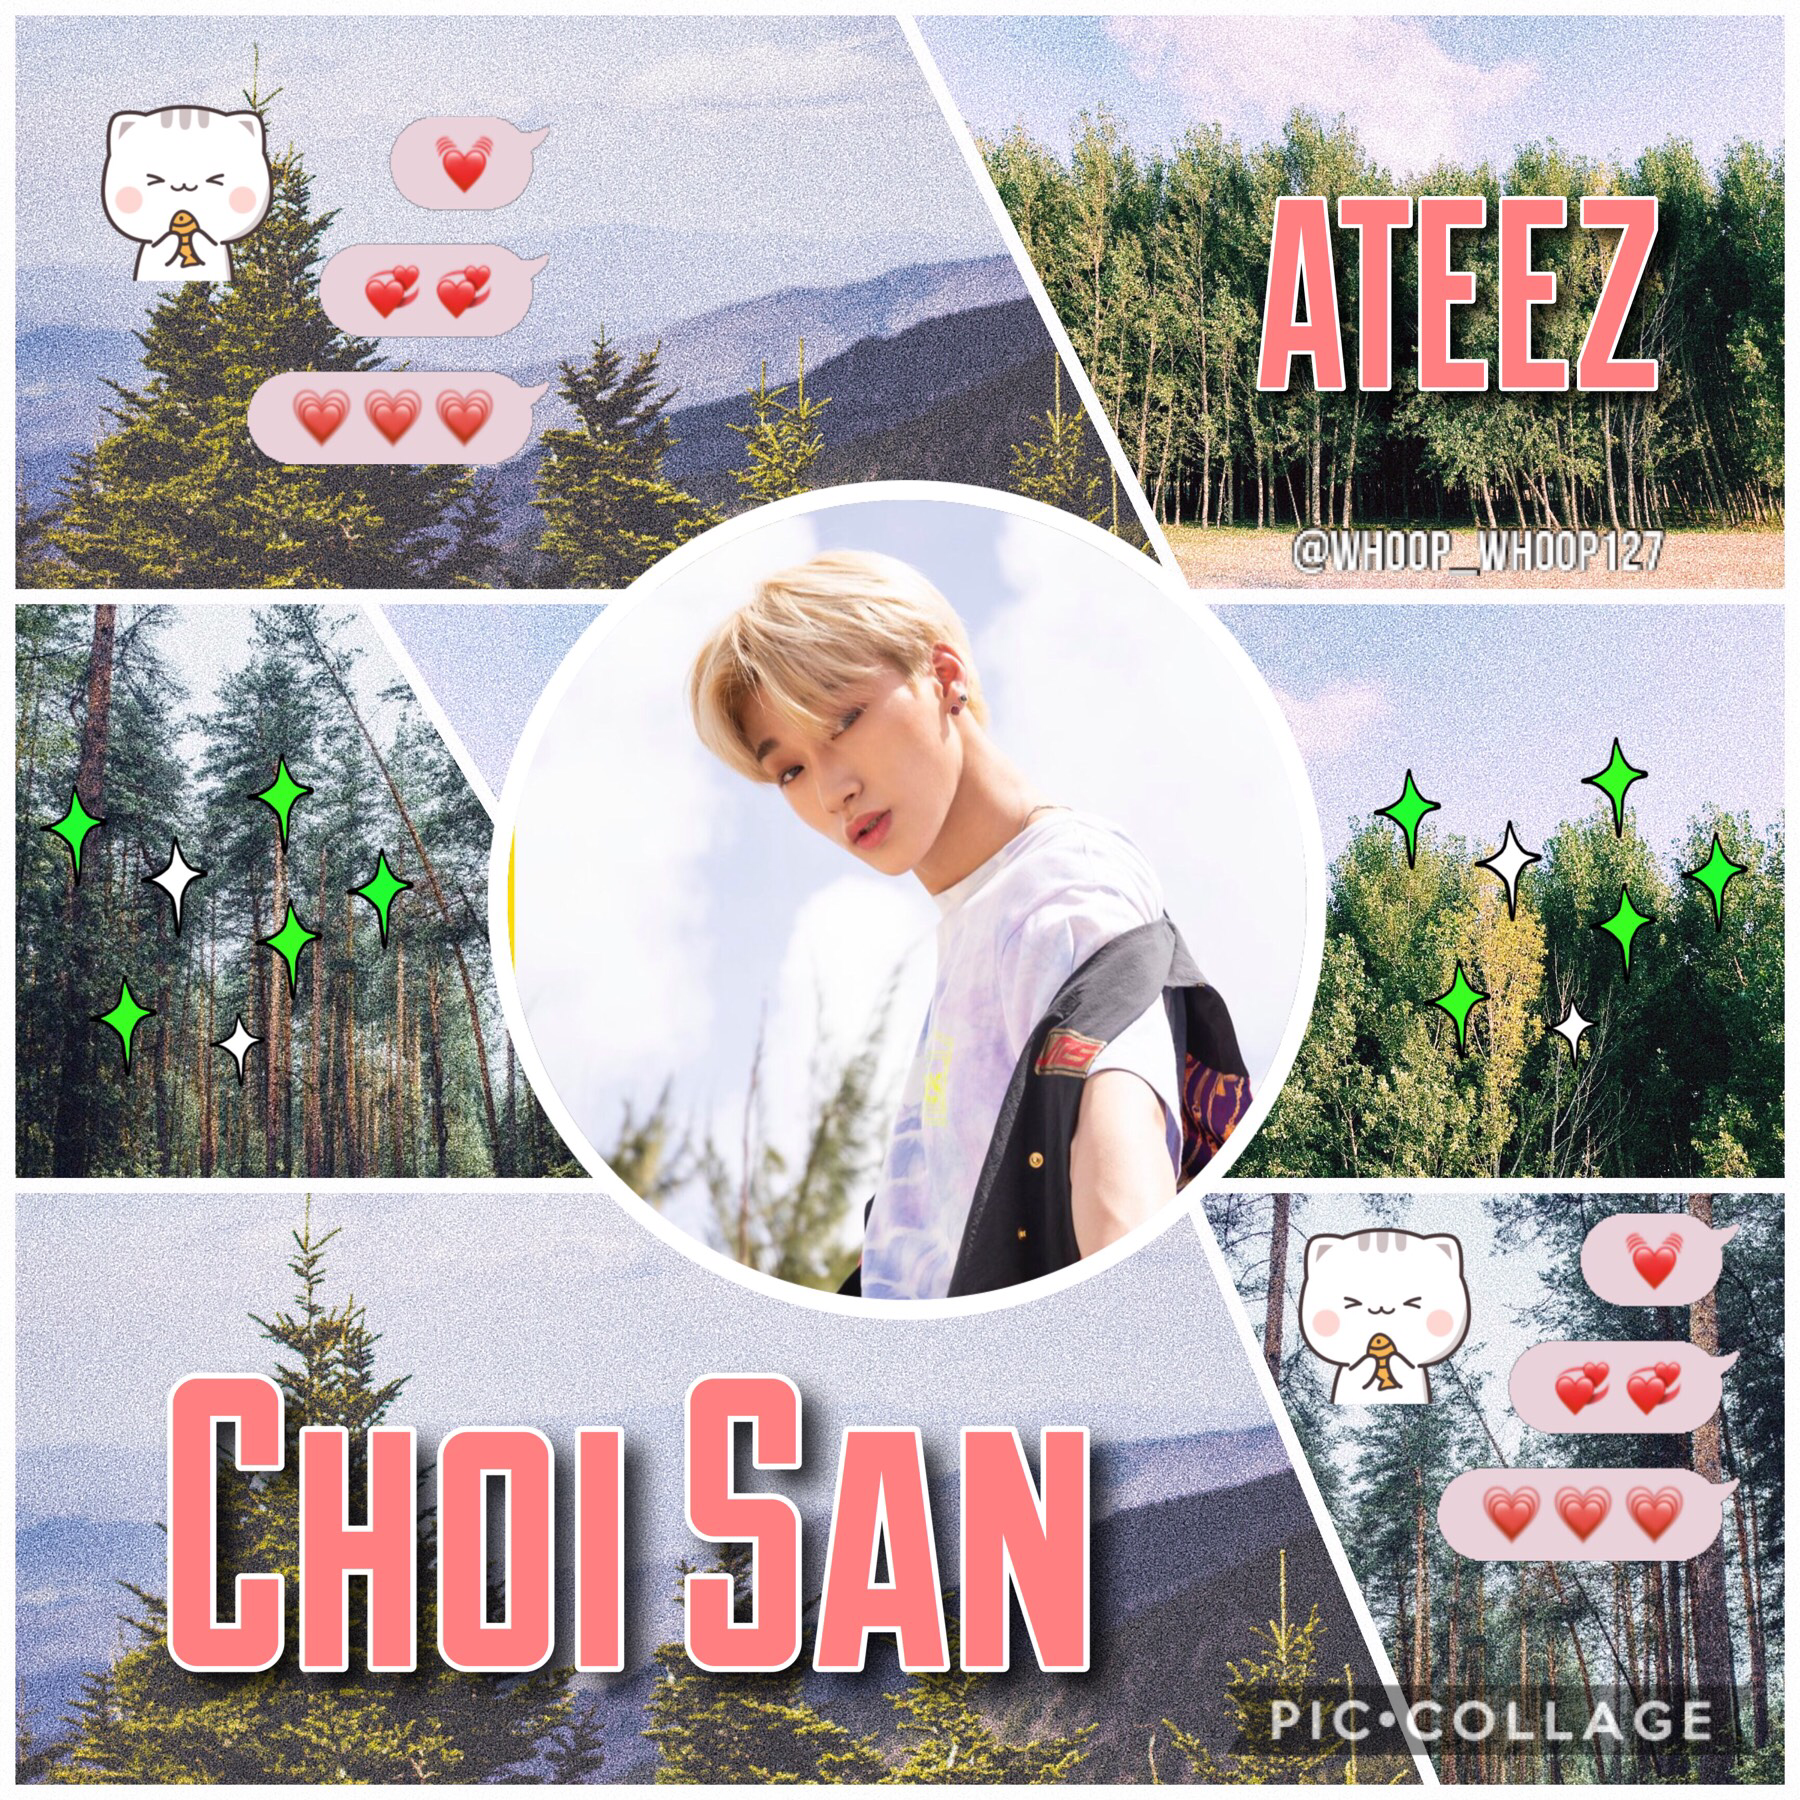 •🚒•
🌷San~ ATEEZ🌷
This is a super simple edit- it’s mostly for the aesthetic I guess lol😊
ATEEZ’s comeback was mind blowing. They never disappoint tbh- one of the greatest debuts. Stan ATEEZ